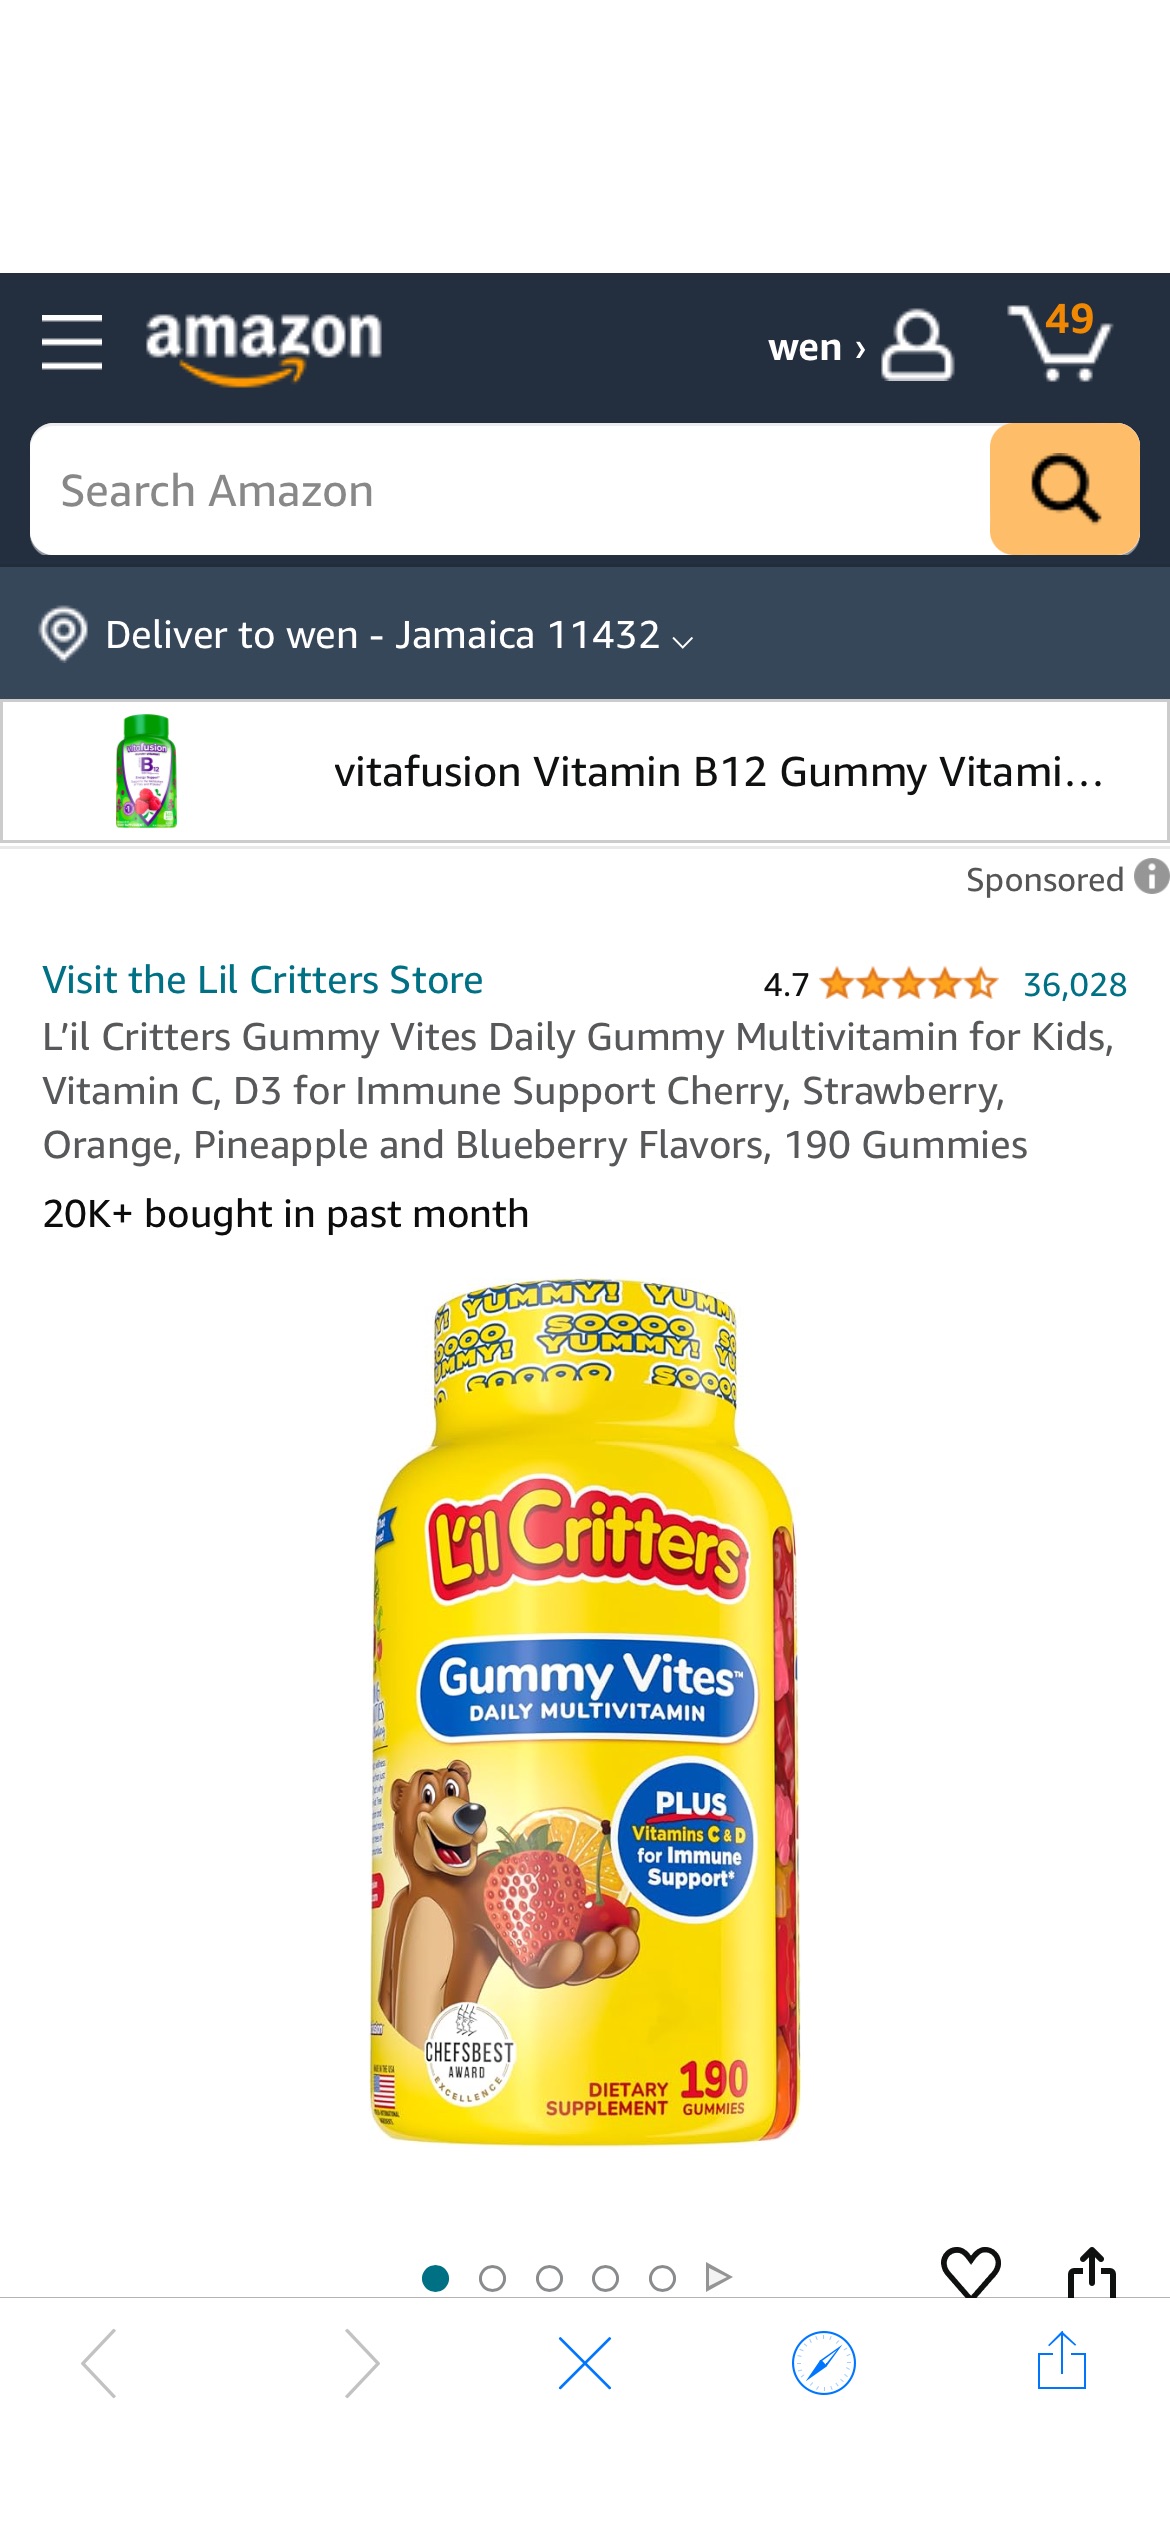 Amazon.com: L’il Critters Gummy Vites Daily Gummy Multivitamin for Kids, Vitamin C, D3 for Immune Support Cherry, Strawberry, Orange, Pineapple and Blueberry Flavors, 190 Gummies : Health & Household